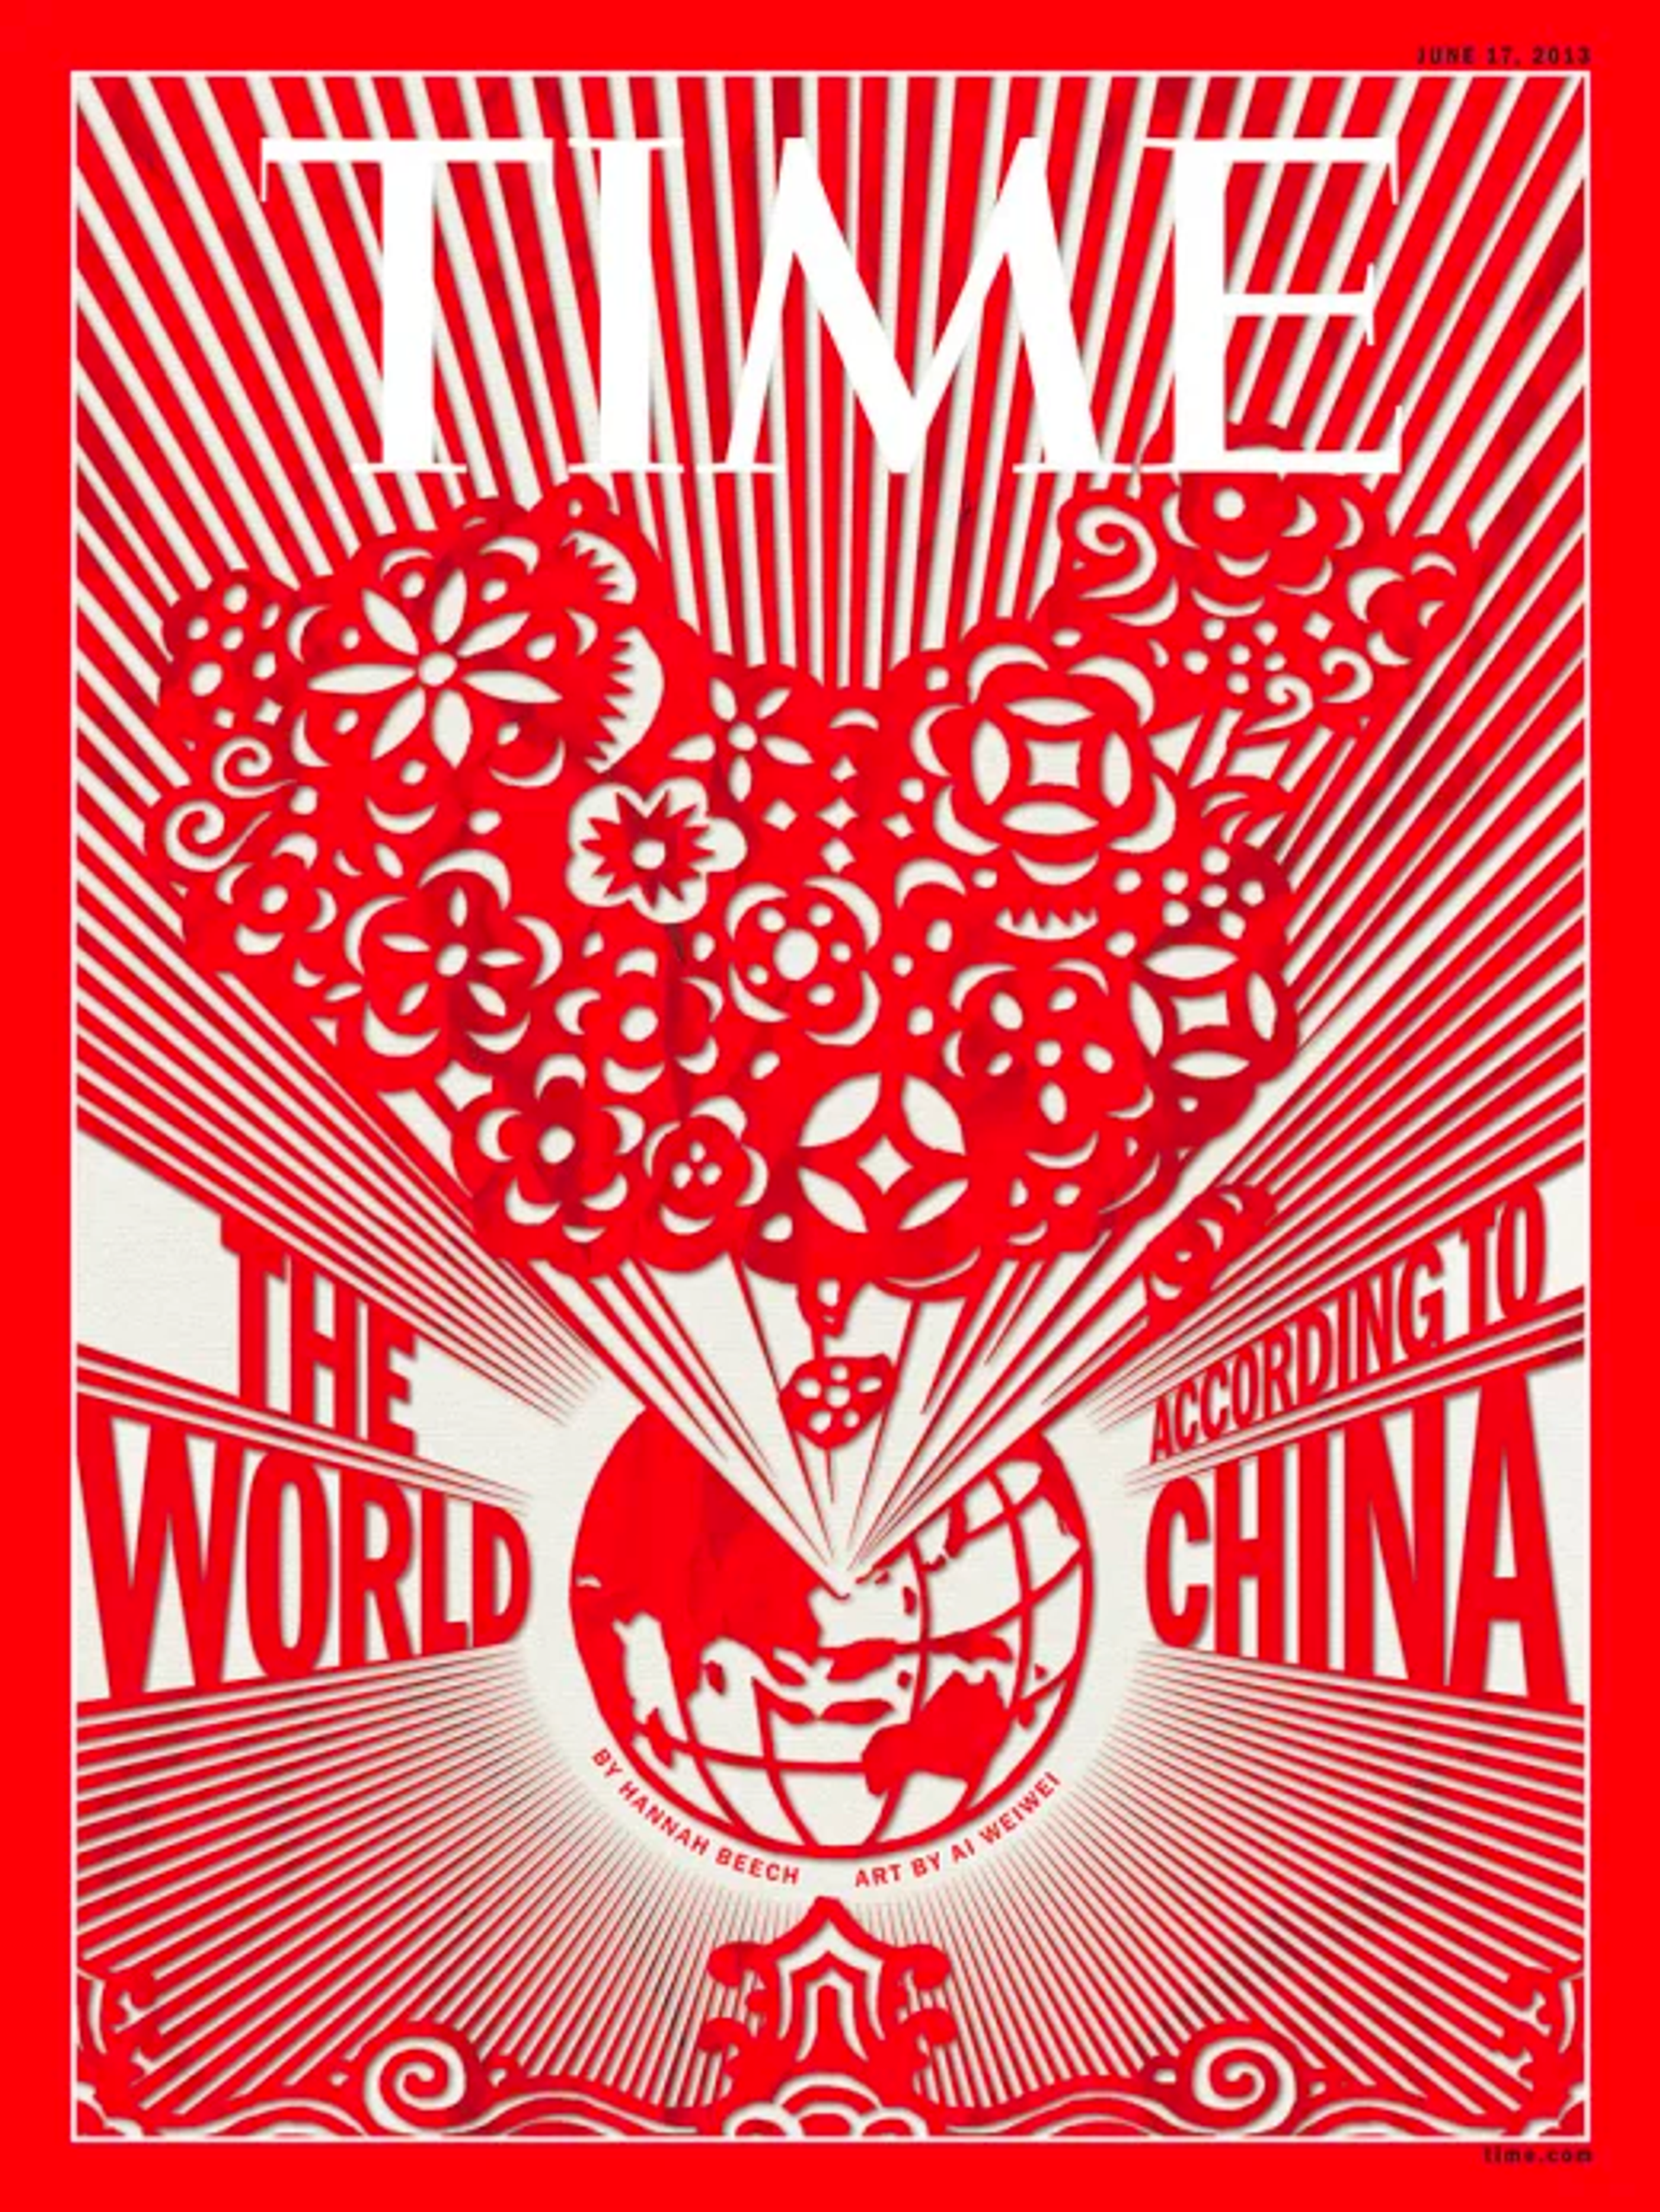 Magazine cover depicting the globe on a red and white background, with text reading ‘THE WORLD ACCORDING TO CHINA’.